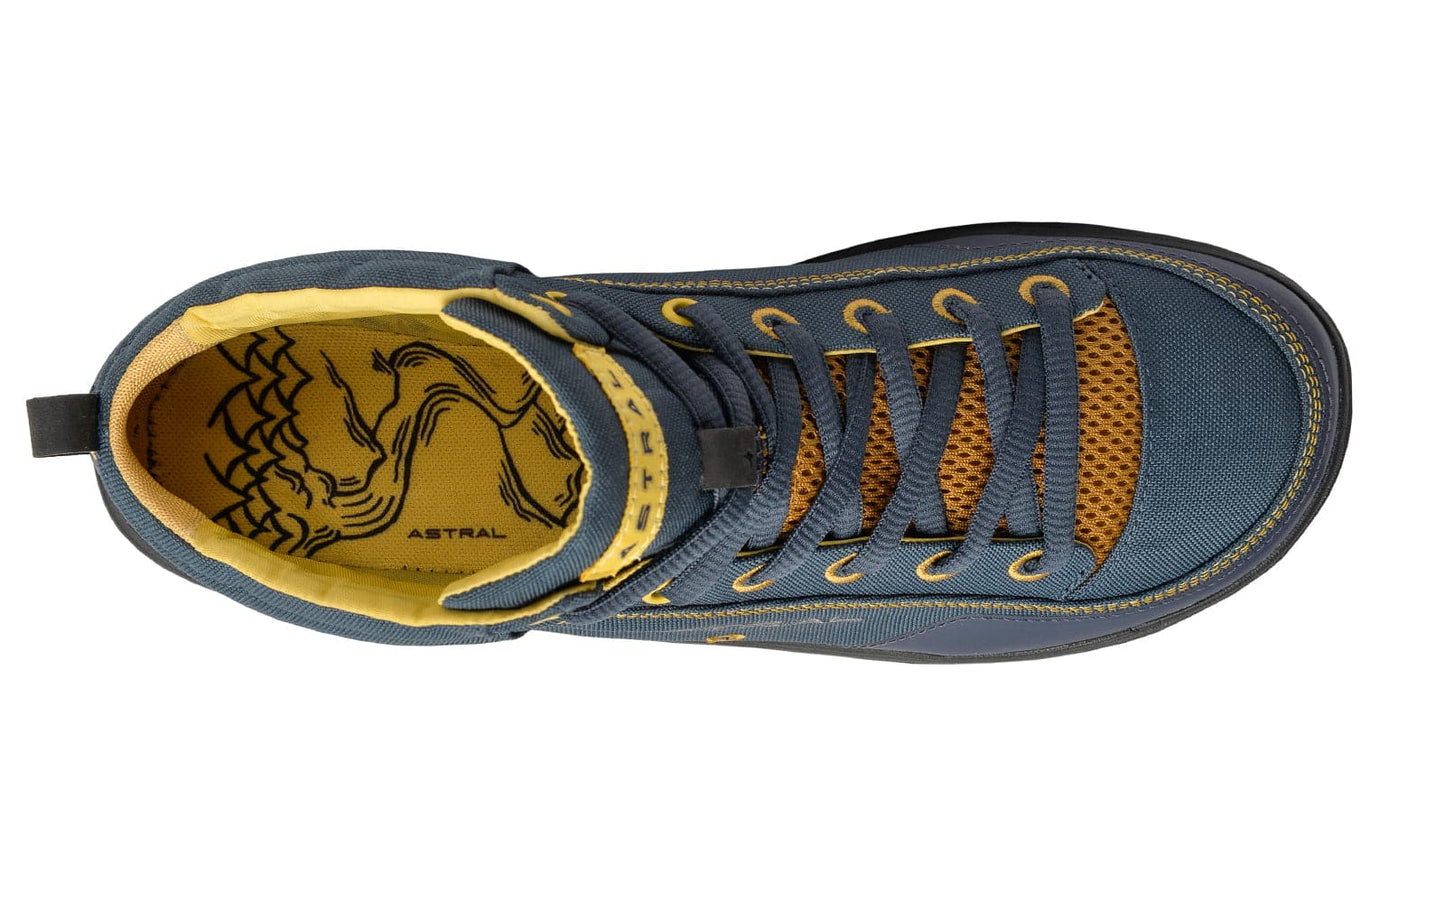 Featuring the Rassler 2.0 men's footwear, women's footwear manufactured by Astral shown here from a third angle.